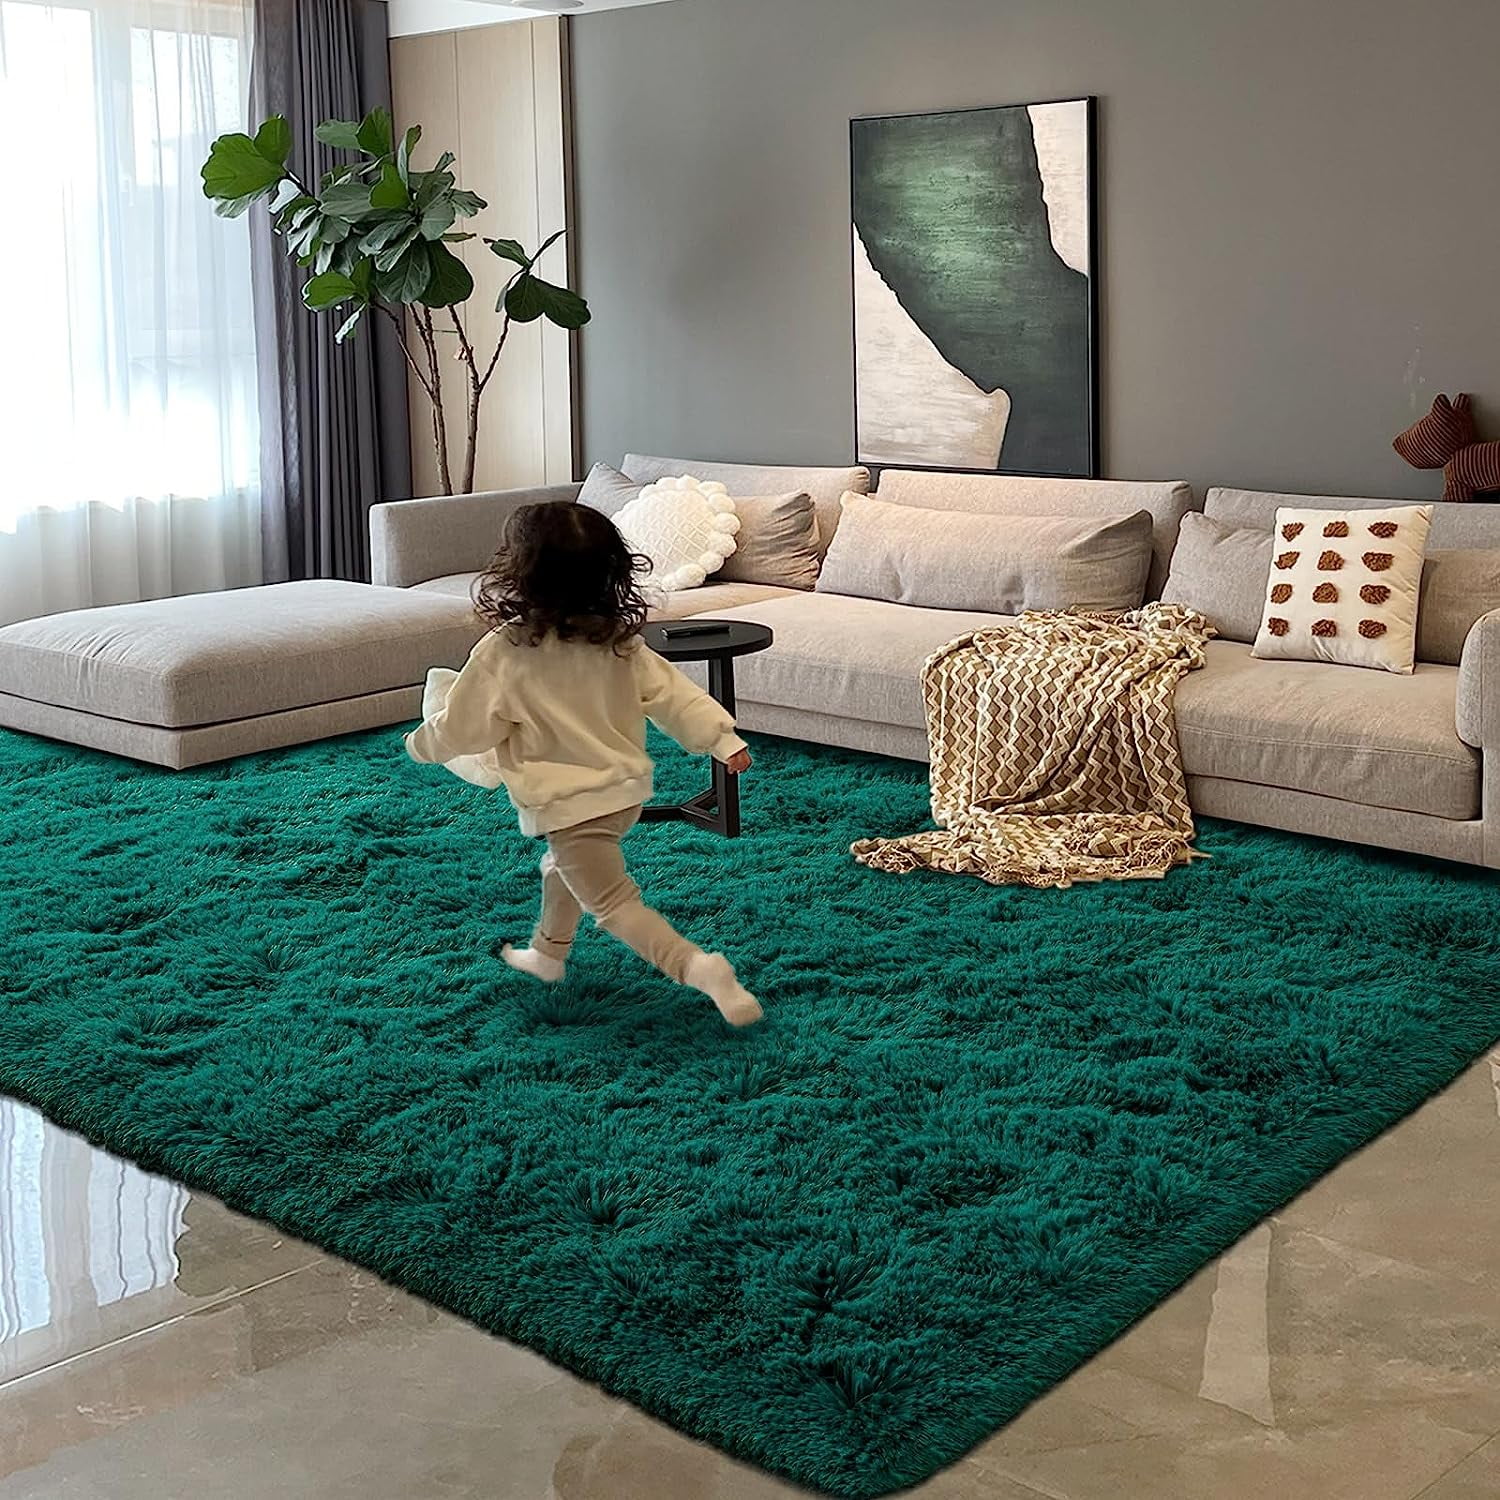 The Girl with The Green sofaBlog HomeMy New Living Room Rug, with Modern  Rugs